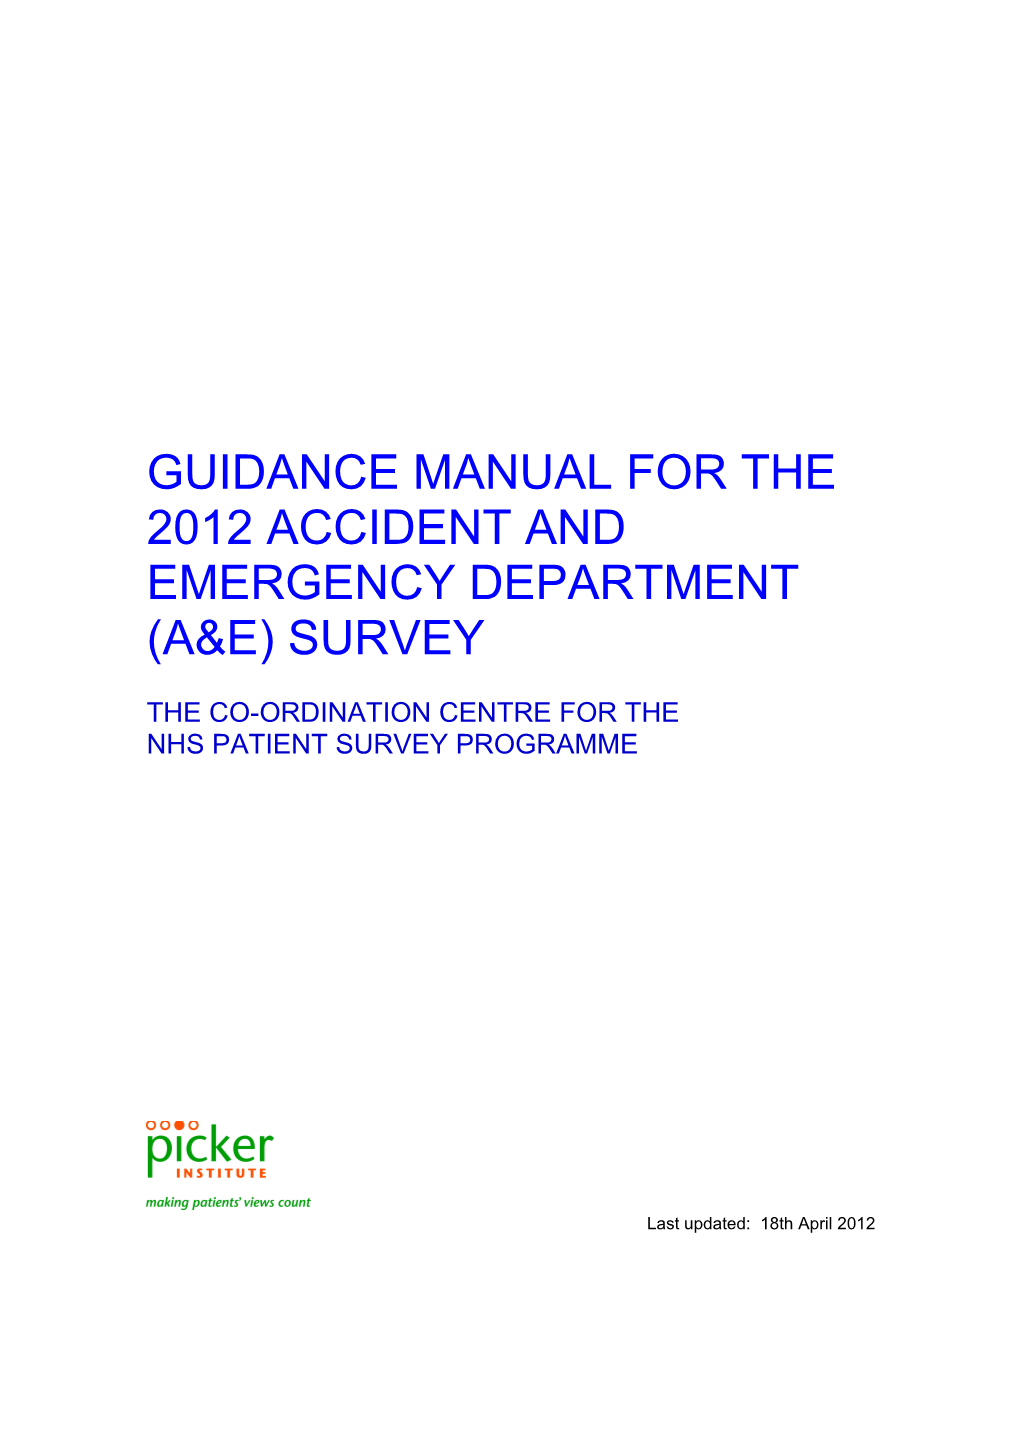 Guidance Manual for the 2012 Accident and Emergency Department (A&E) Survey